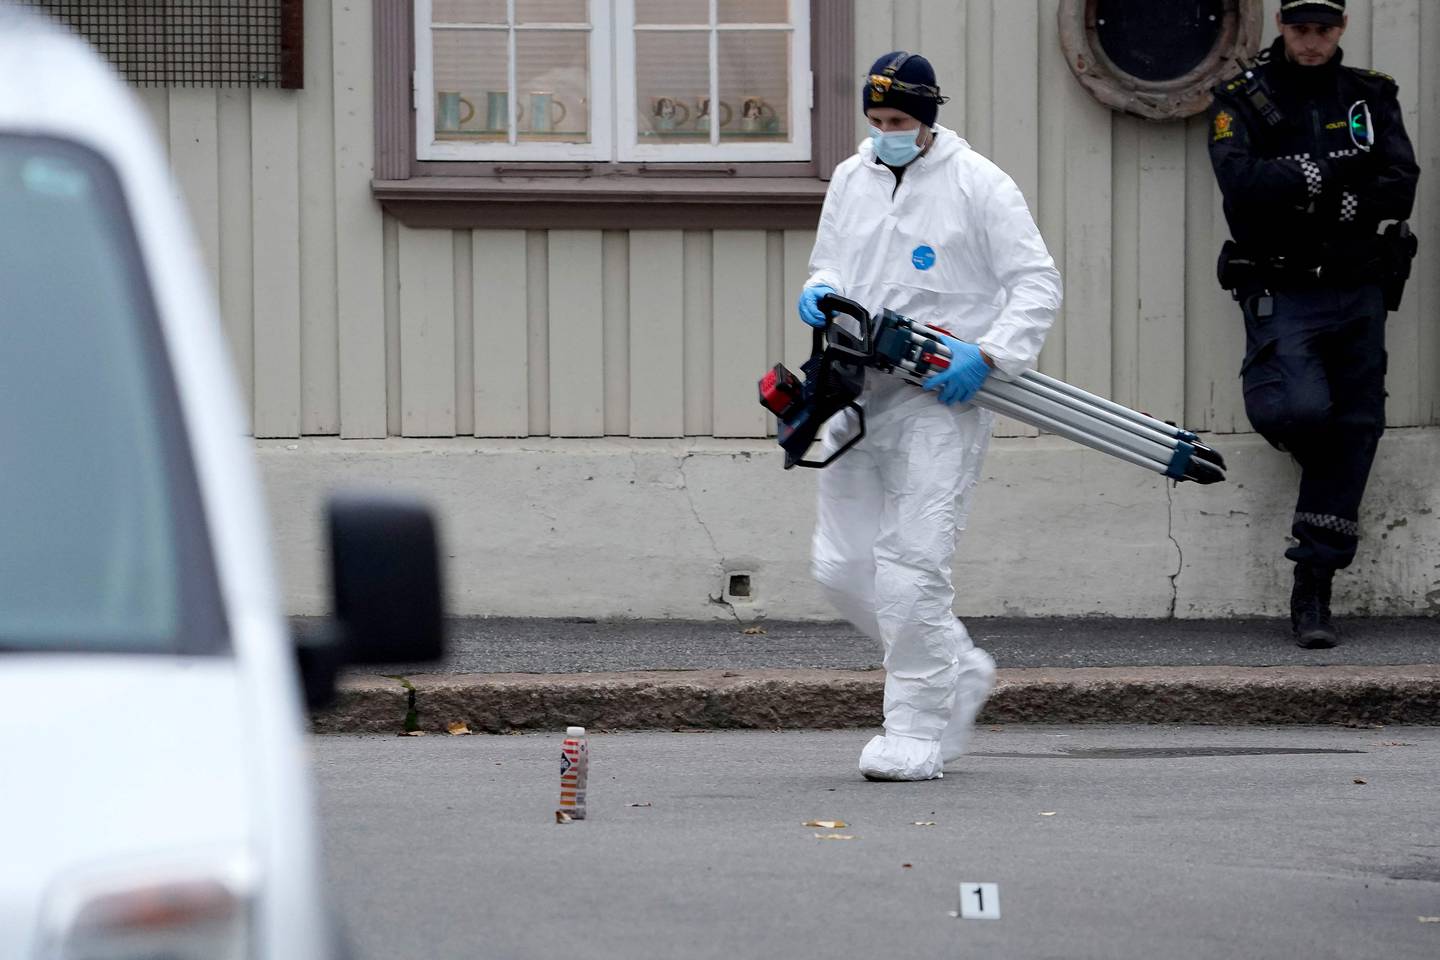 A member of the police forensics team at the scene in Kongsberg. AFP